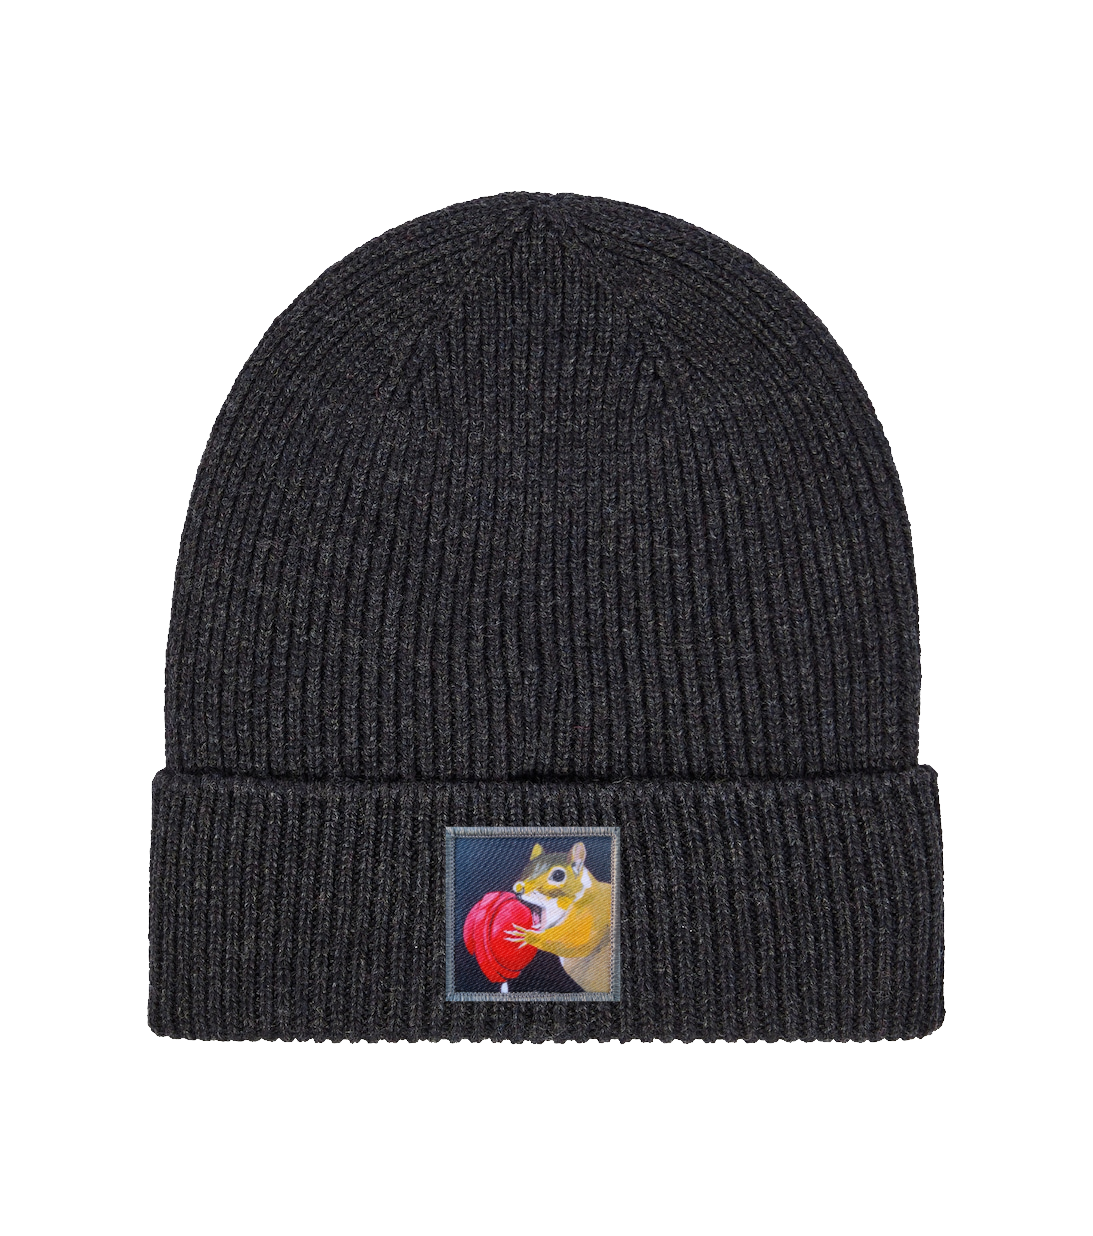 Merino Wool Beanie Charcoal Hats FlynHats Lolly  